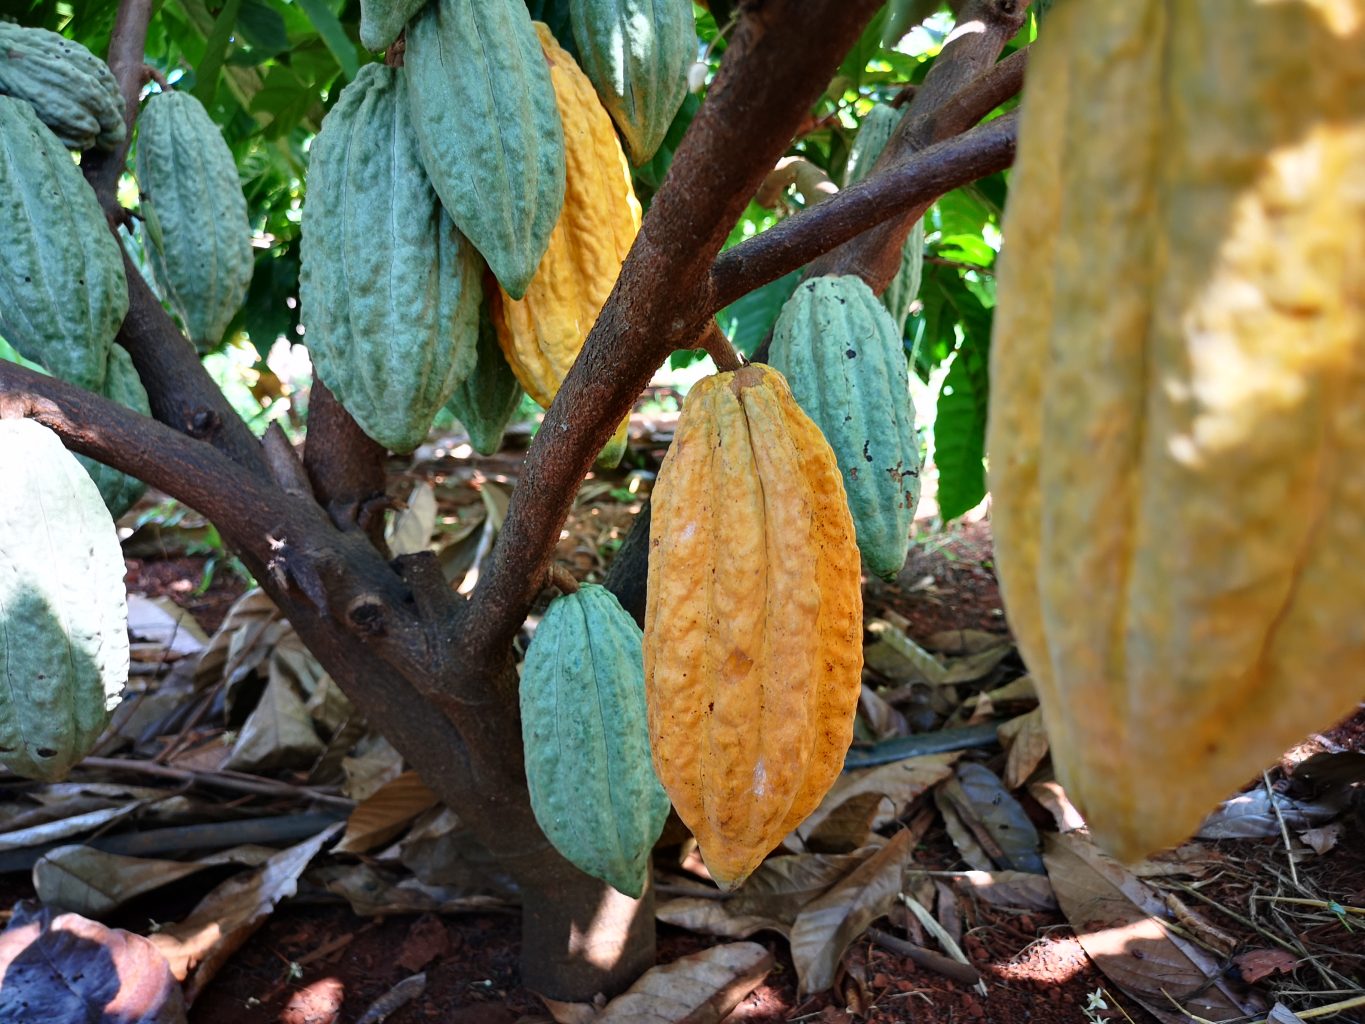 History of cacao in Vietnam